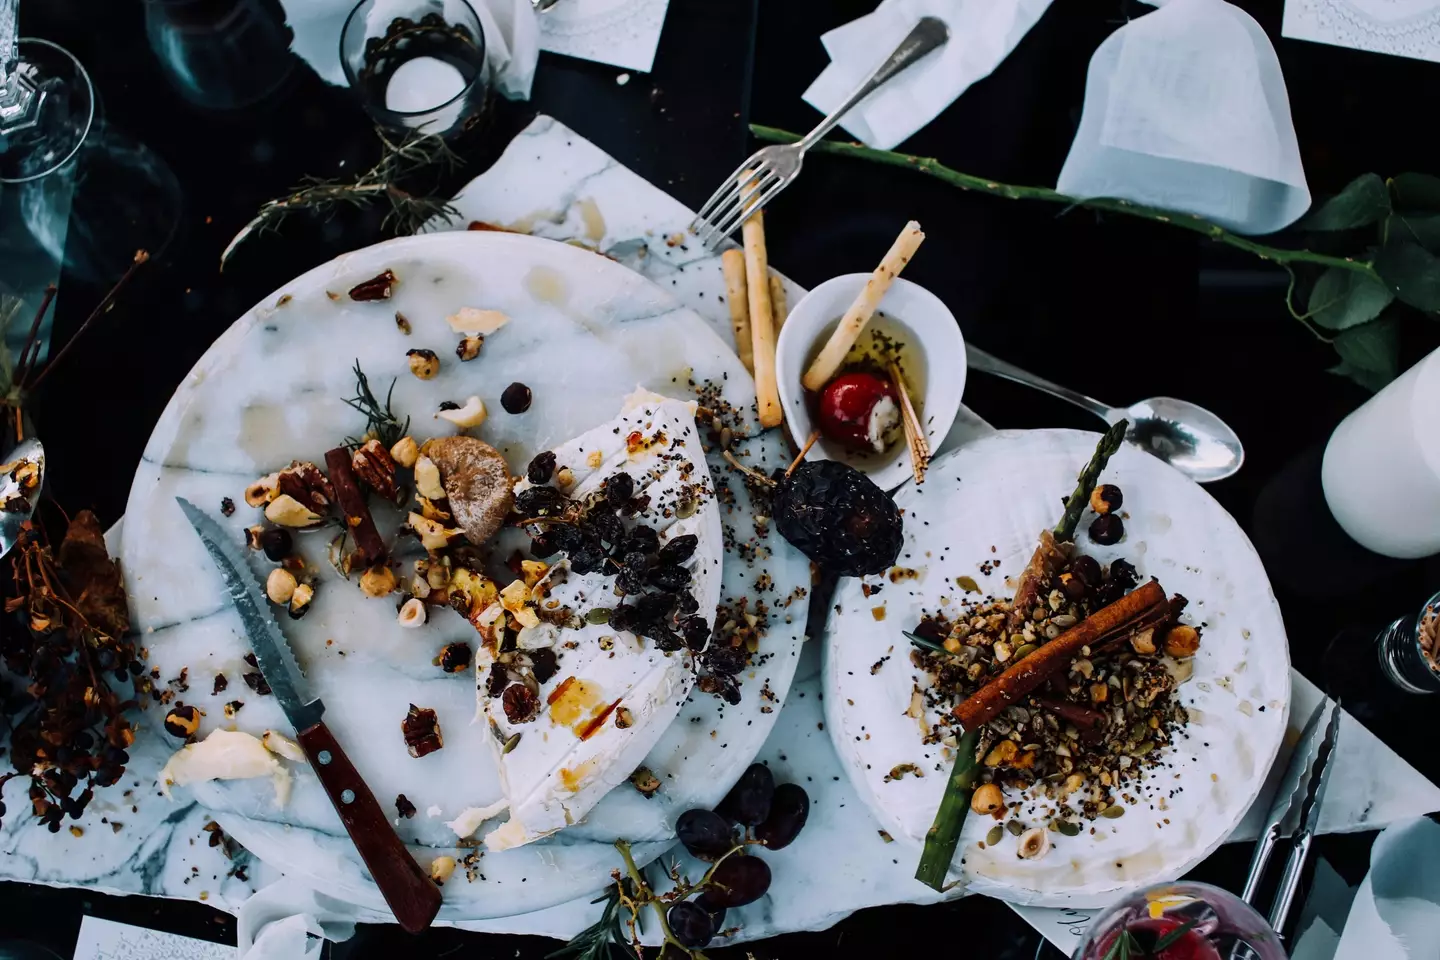 A dirty table with leftover food on it (pexels/Rachel Claire)